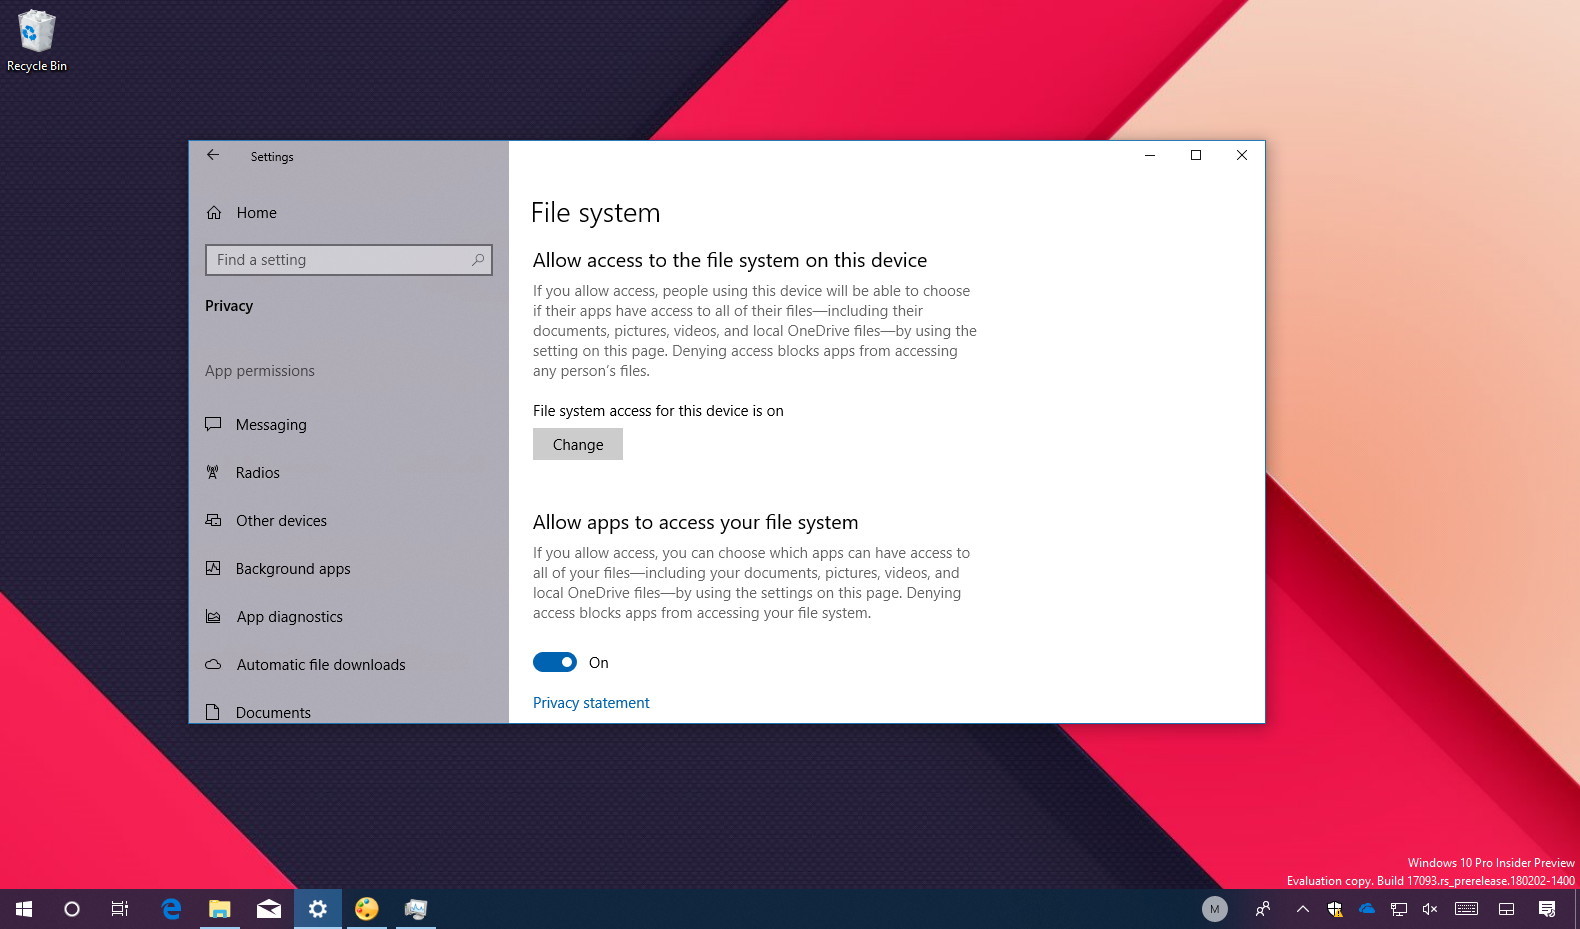 How to block apps access to file system on Windows 10 - Pureinfotech